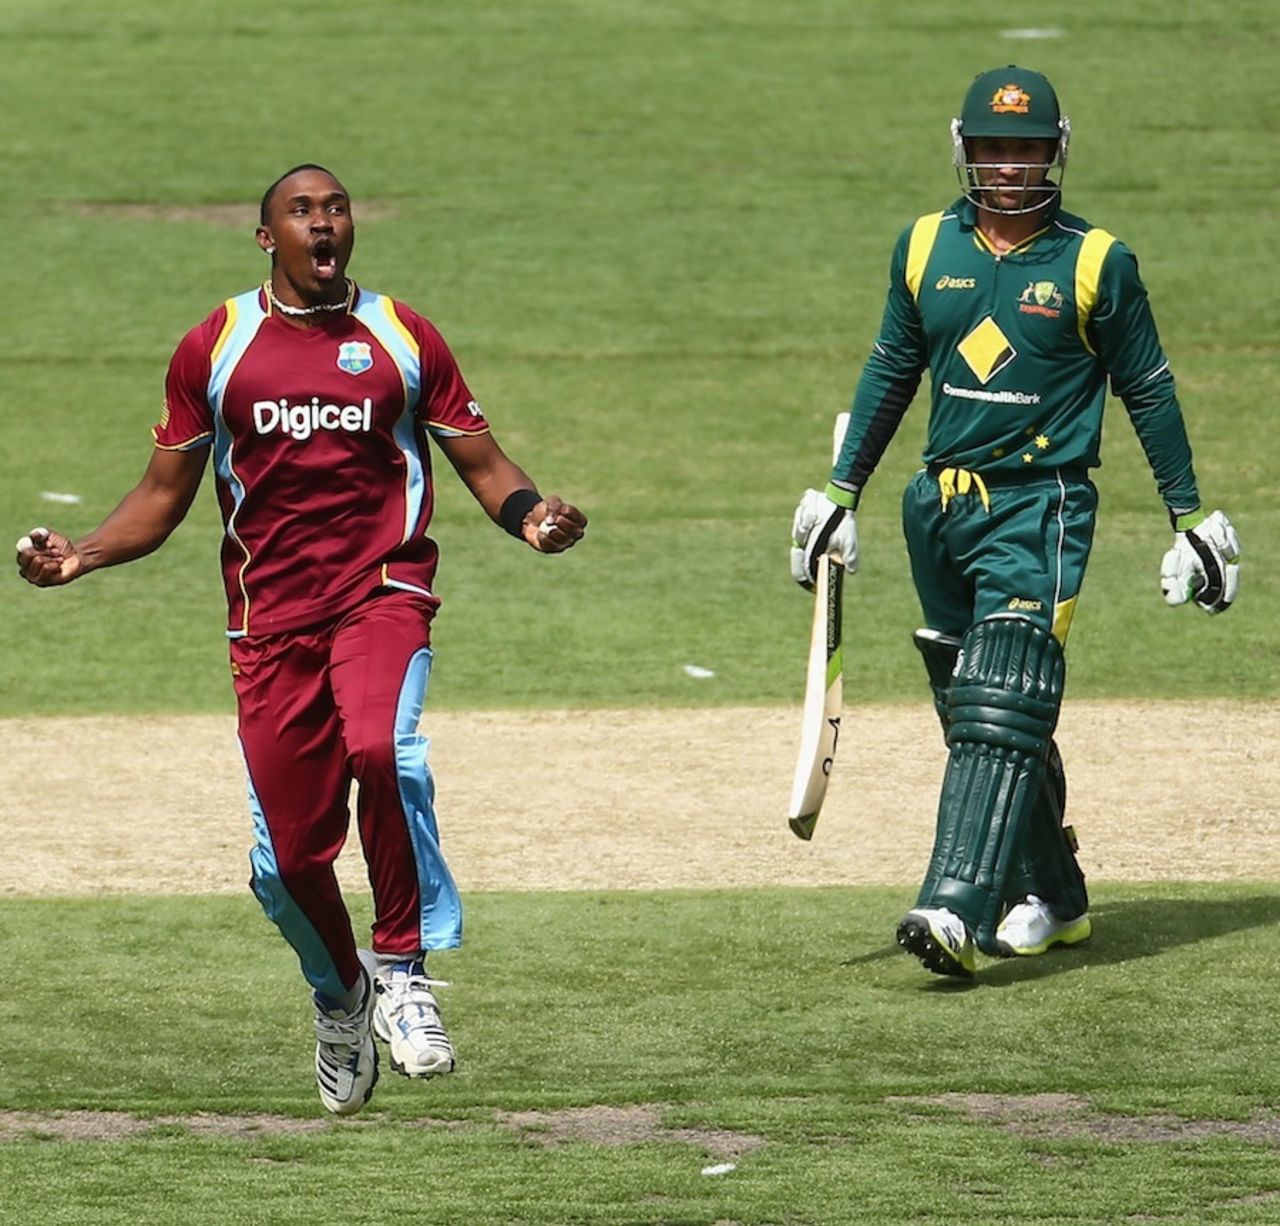 Dwayne Bravo is delighted after removing Phil Hughes, Australia v West Indies, 5th ODI, Melbourne, February 10, 2013